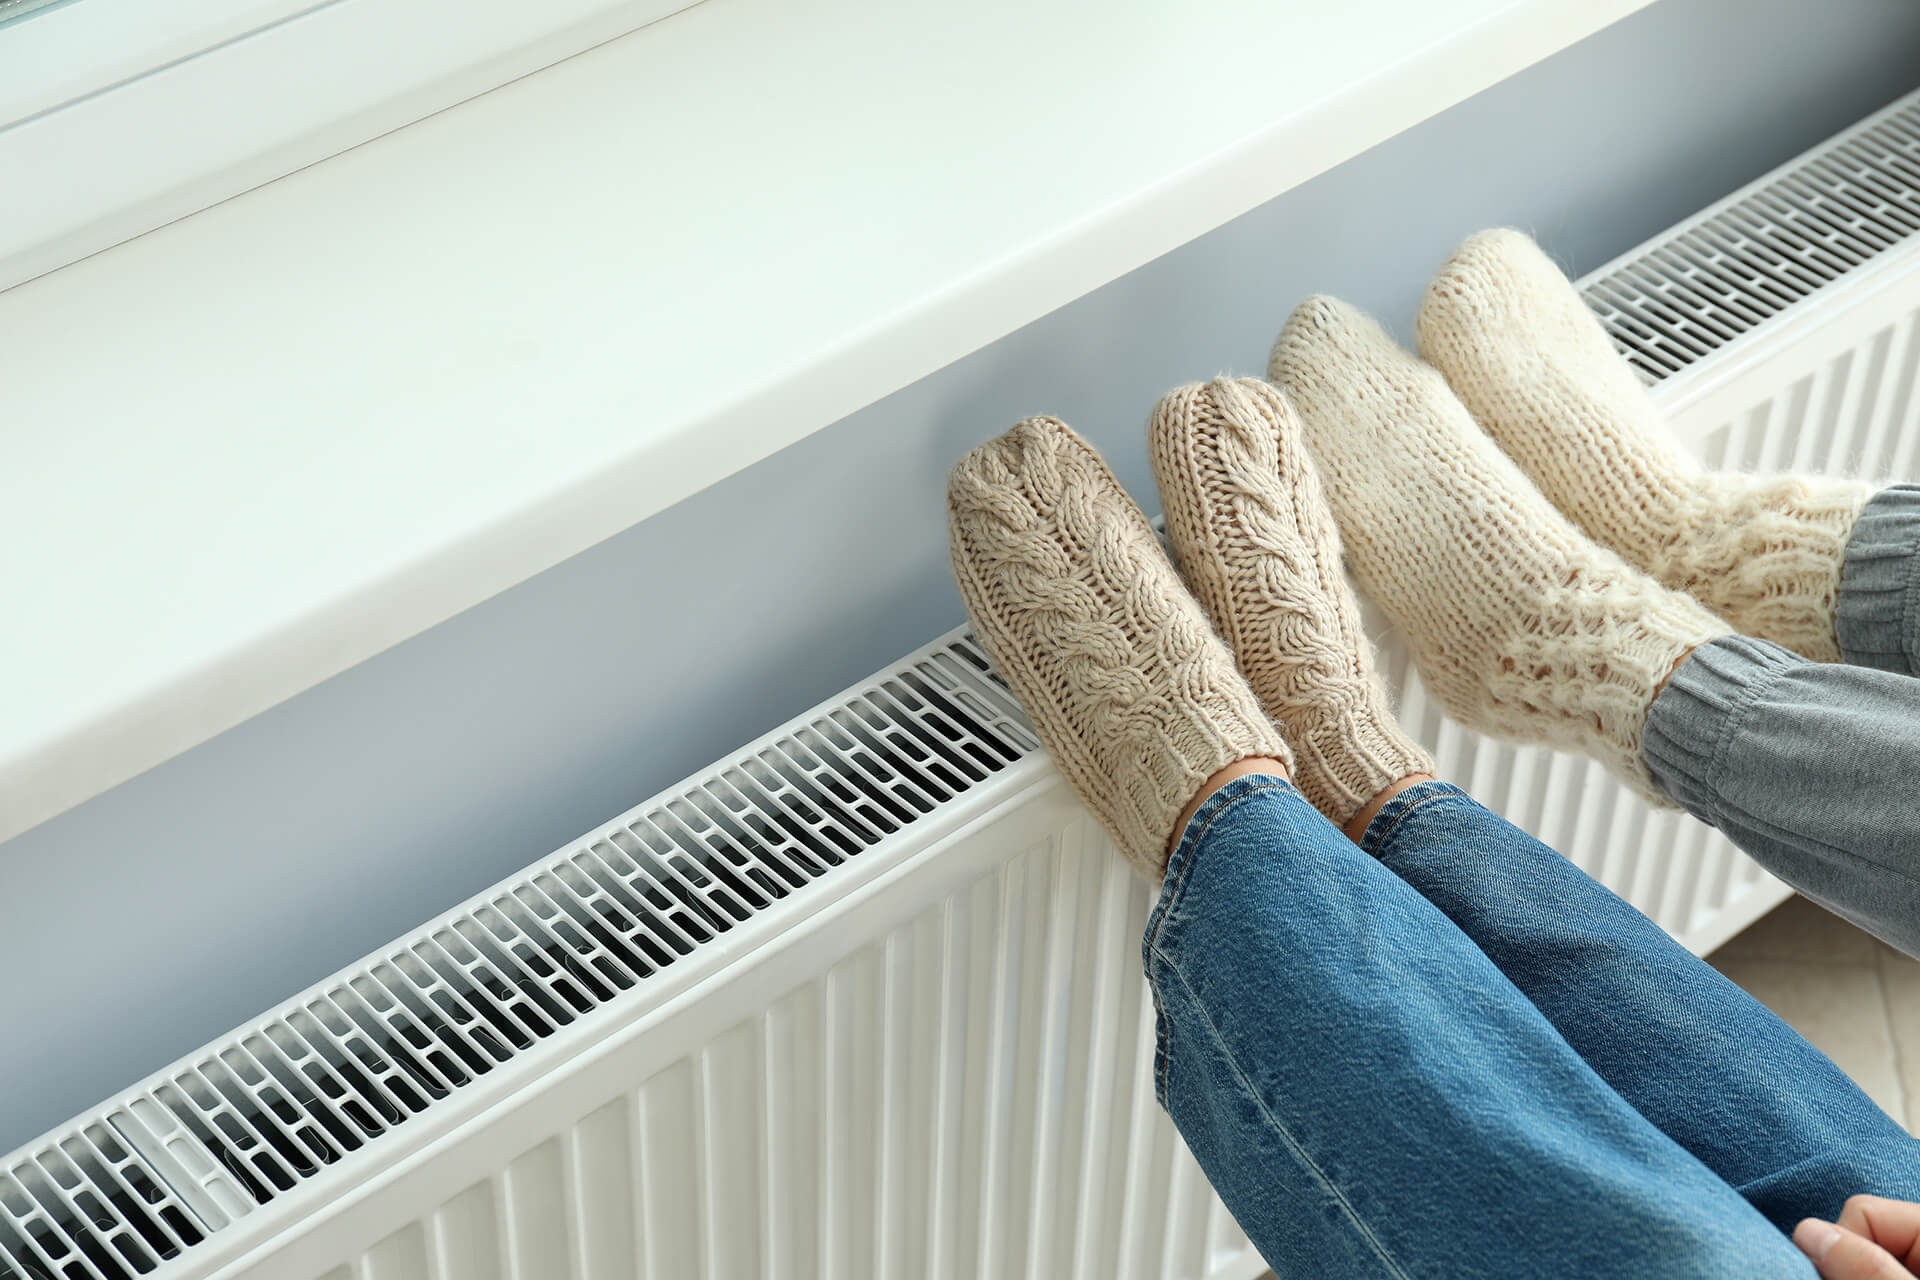 New heating solutions